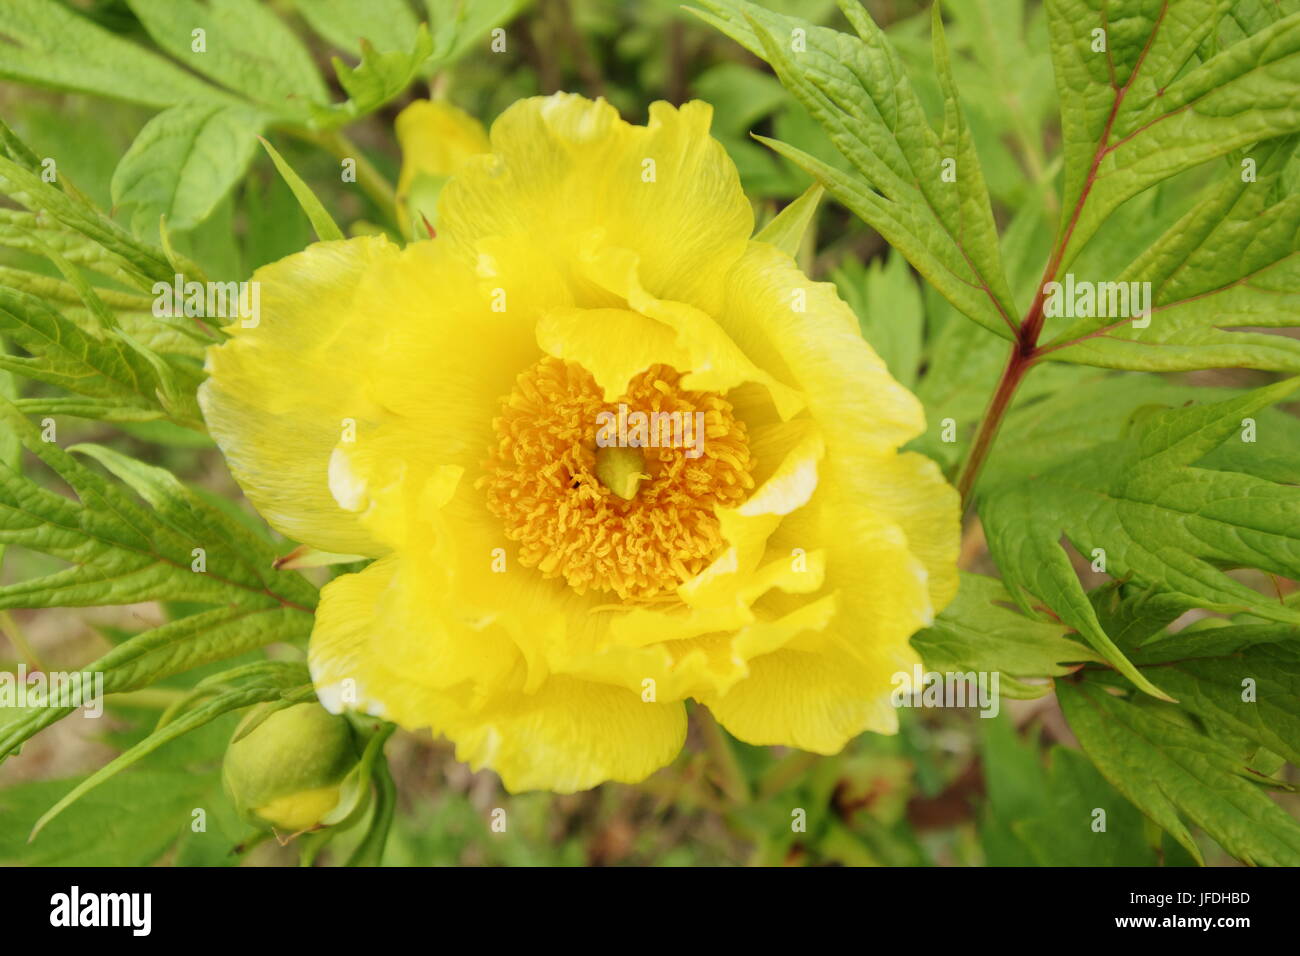 Yellow tree peony (paeonia lutea; variety Ludlowii), flowering in an English garden late spring/early summer, Yorkshire, England UK Stock Photo